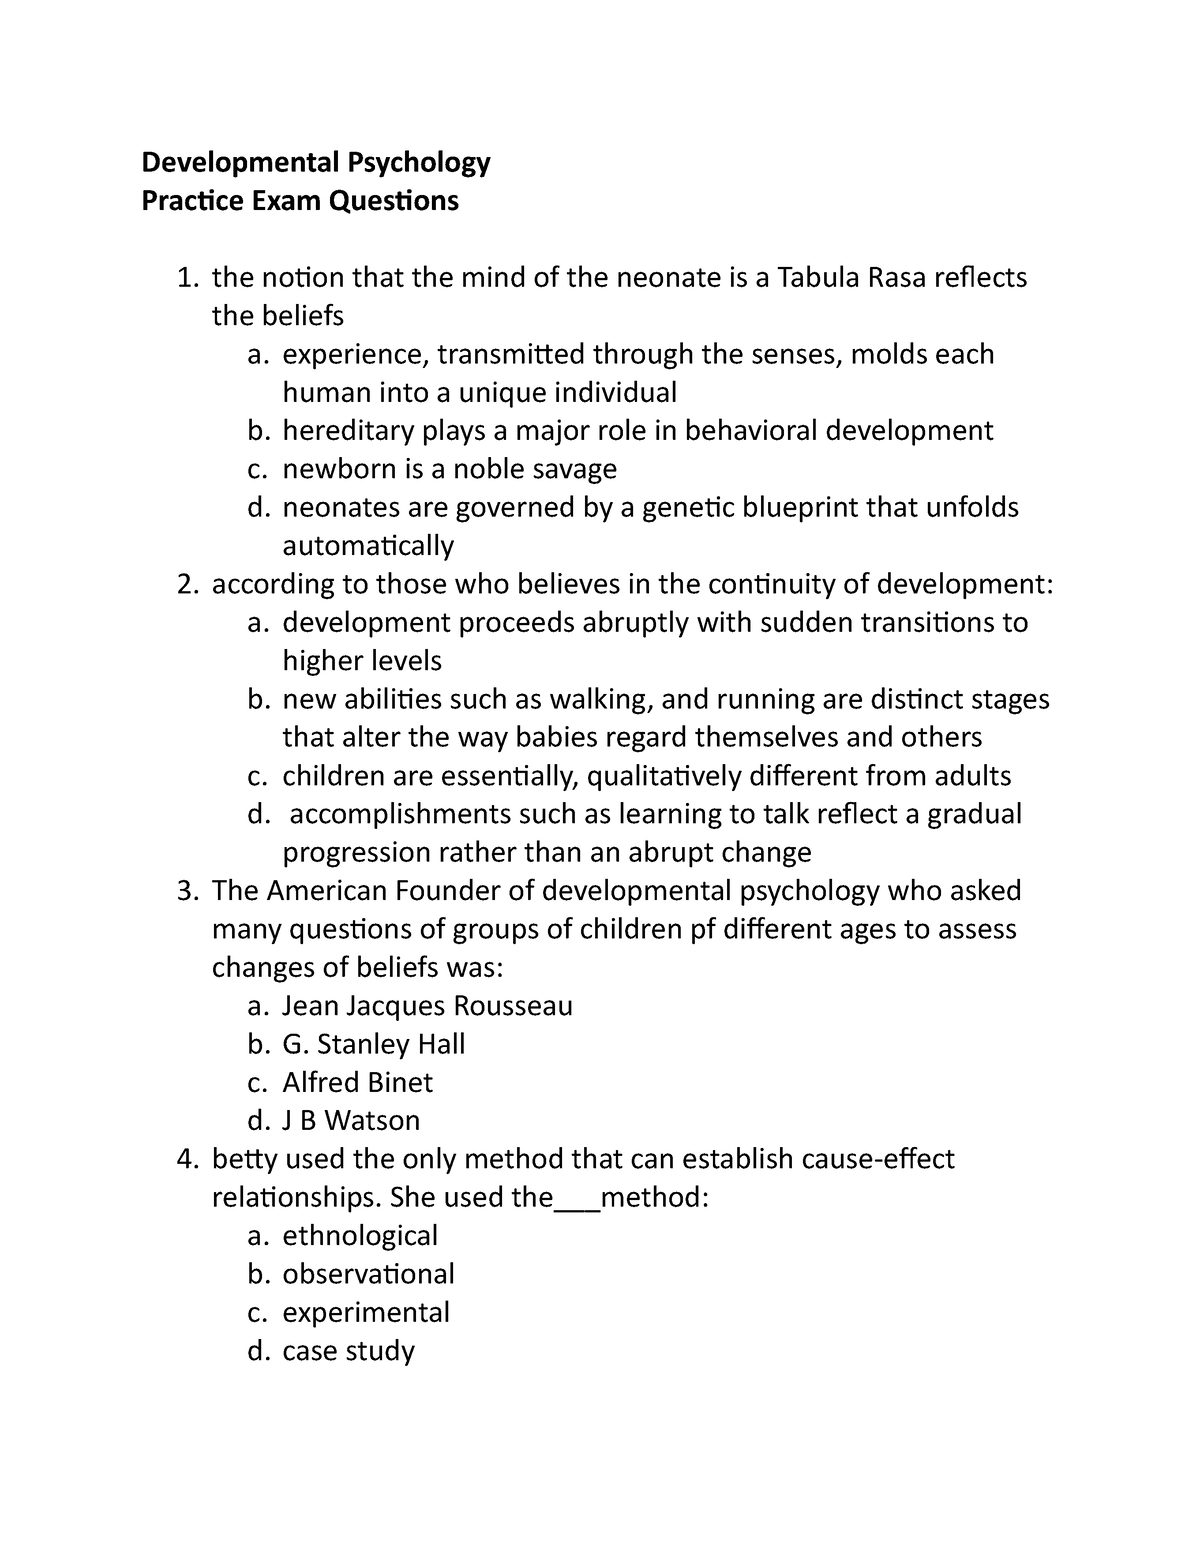 research questions for developmental psychology